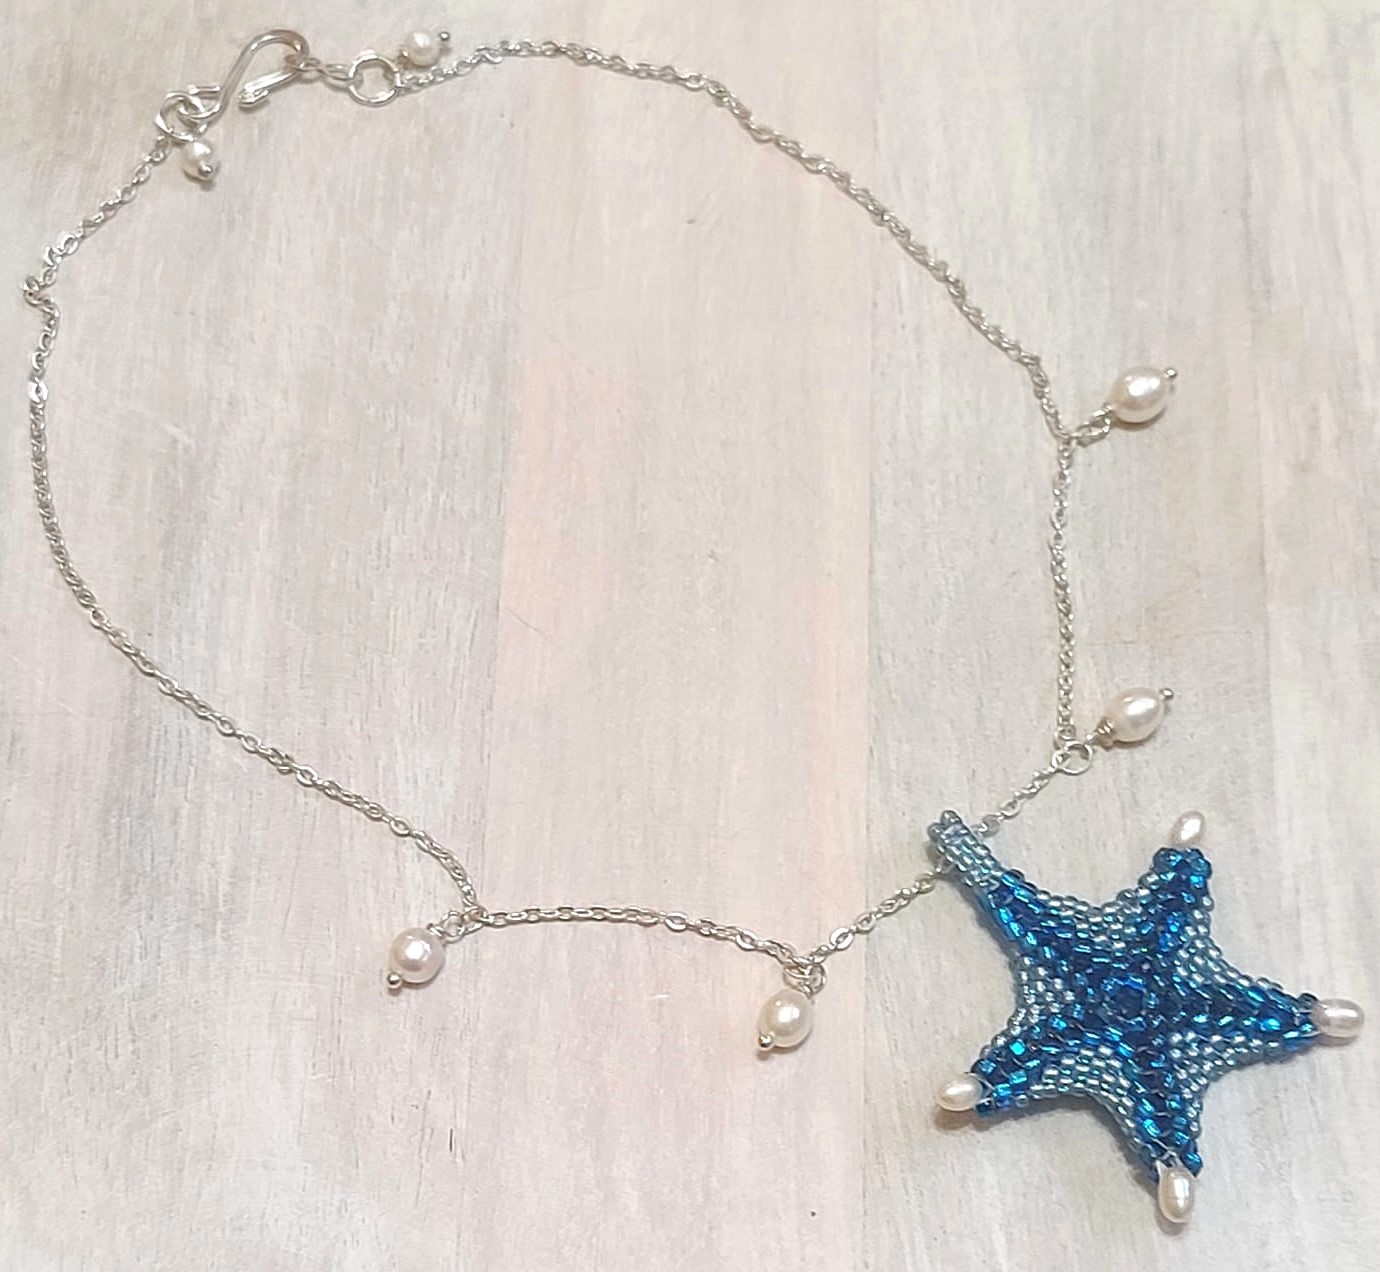 Starfish pendant handcrafted w pearls, sterling silver necklace